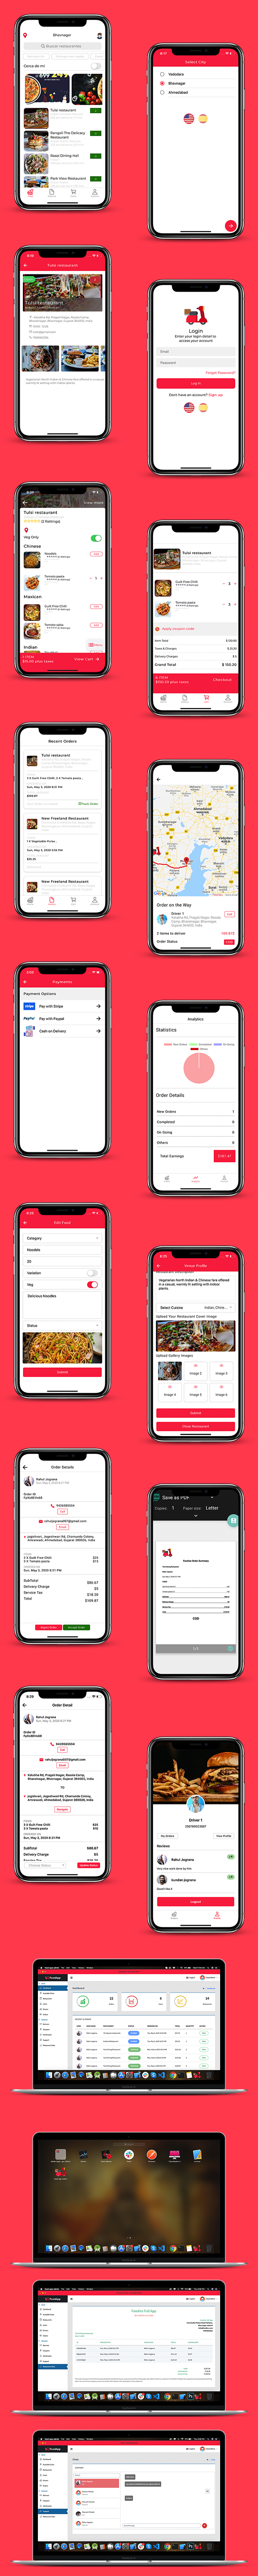 ionic 5 food delivery full (Android + iOS + Admin Panel PWA) app with firebase - 18